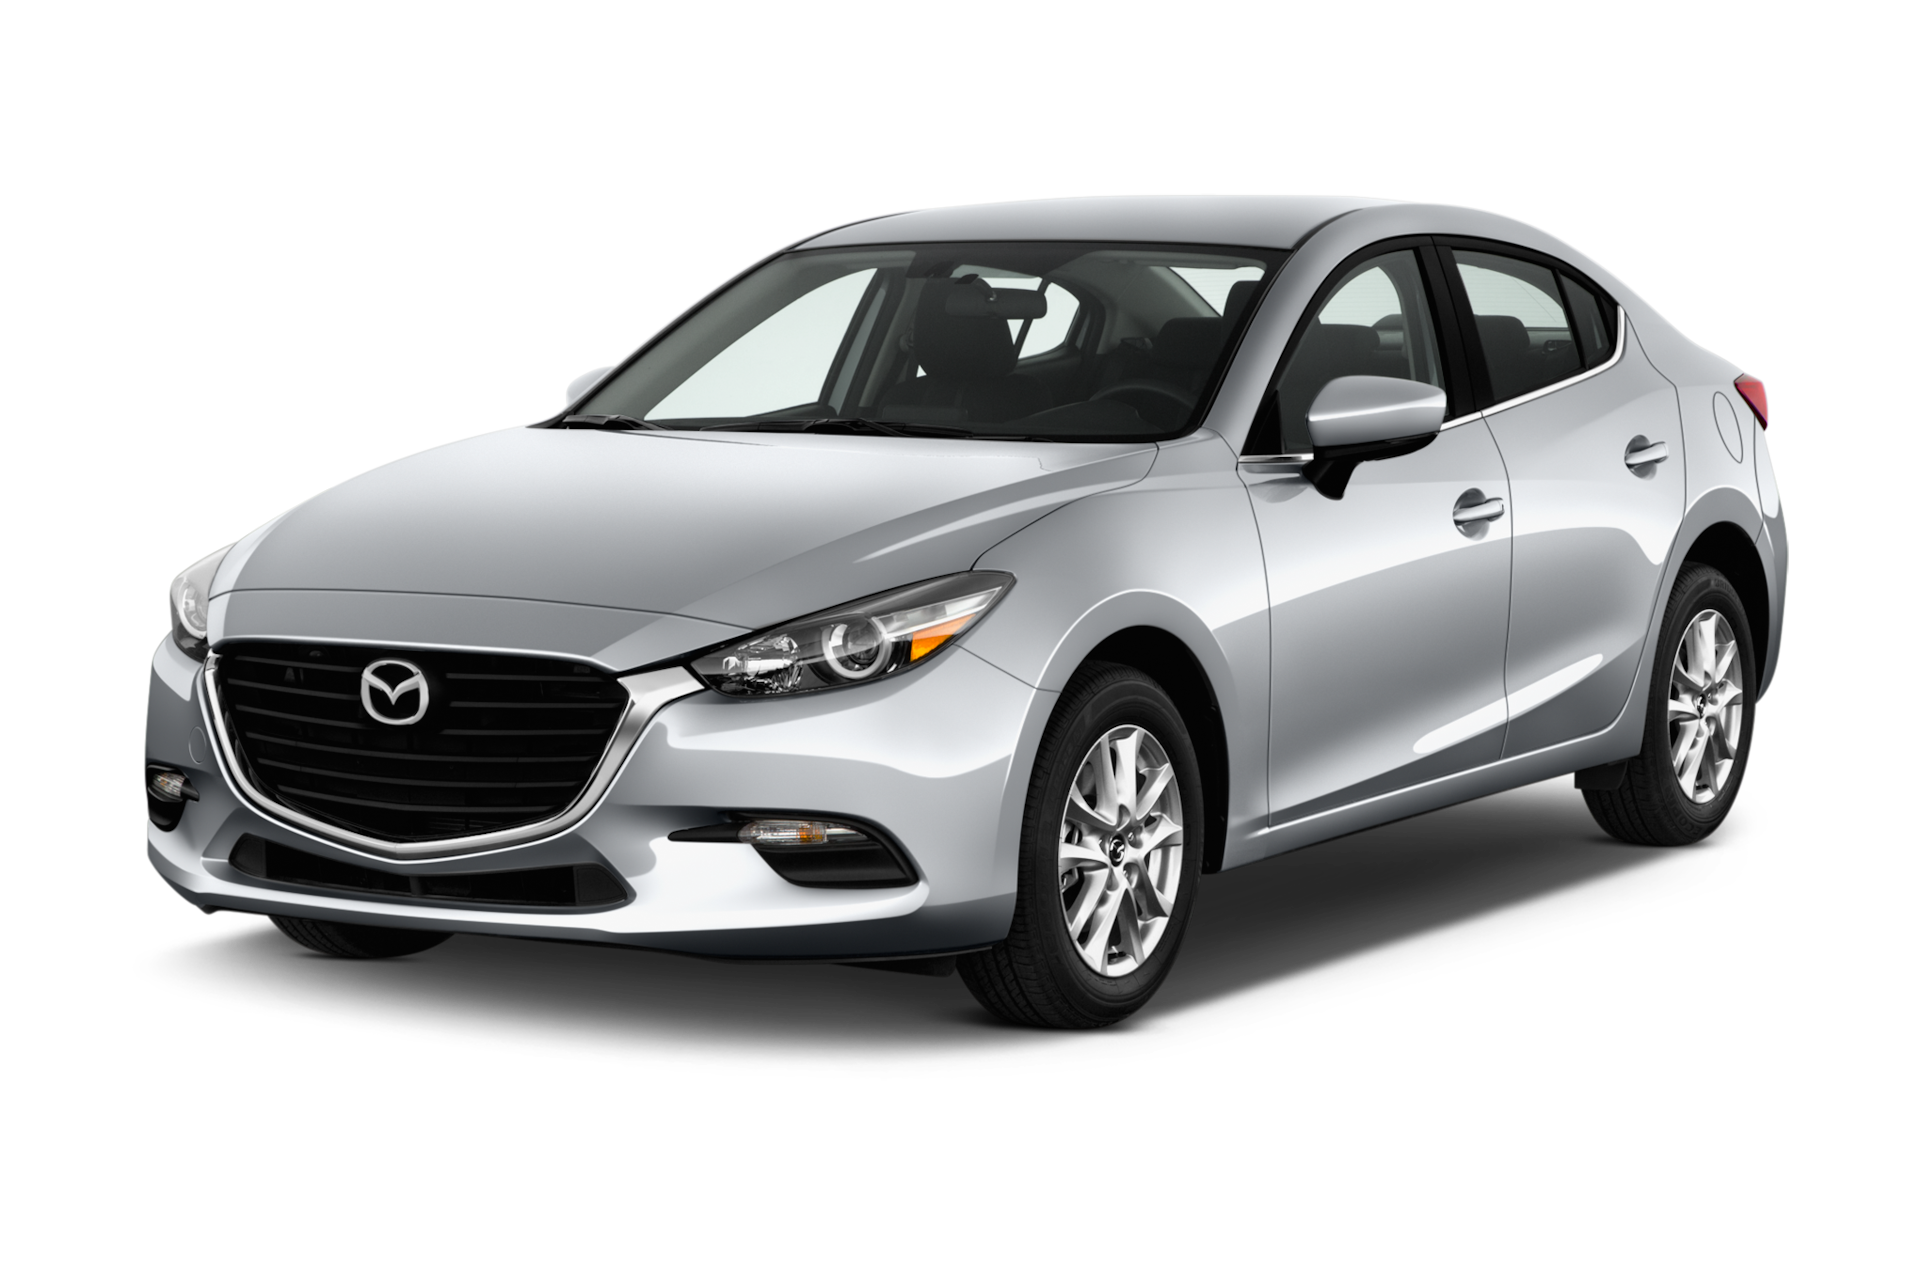 2018 Mazda Mazda3 Prices, Reviews, and Photos - MotorTrend